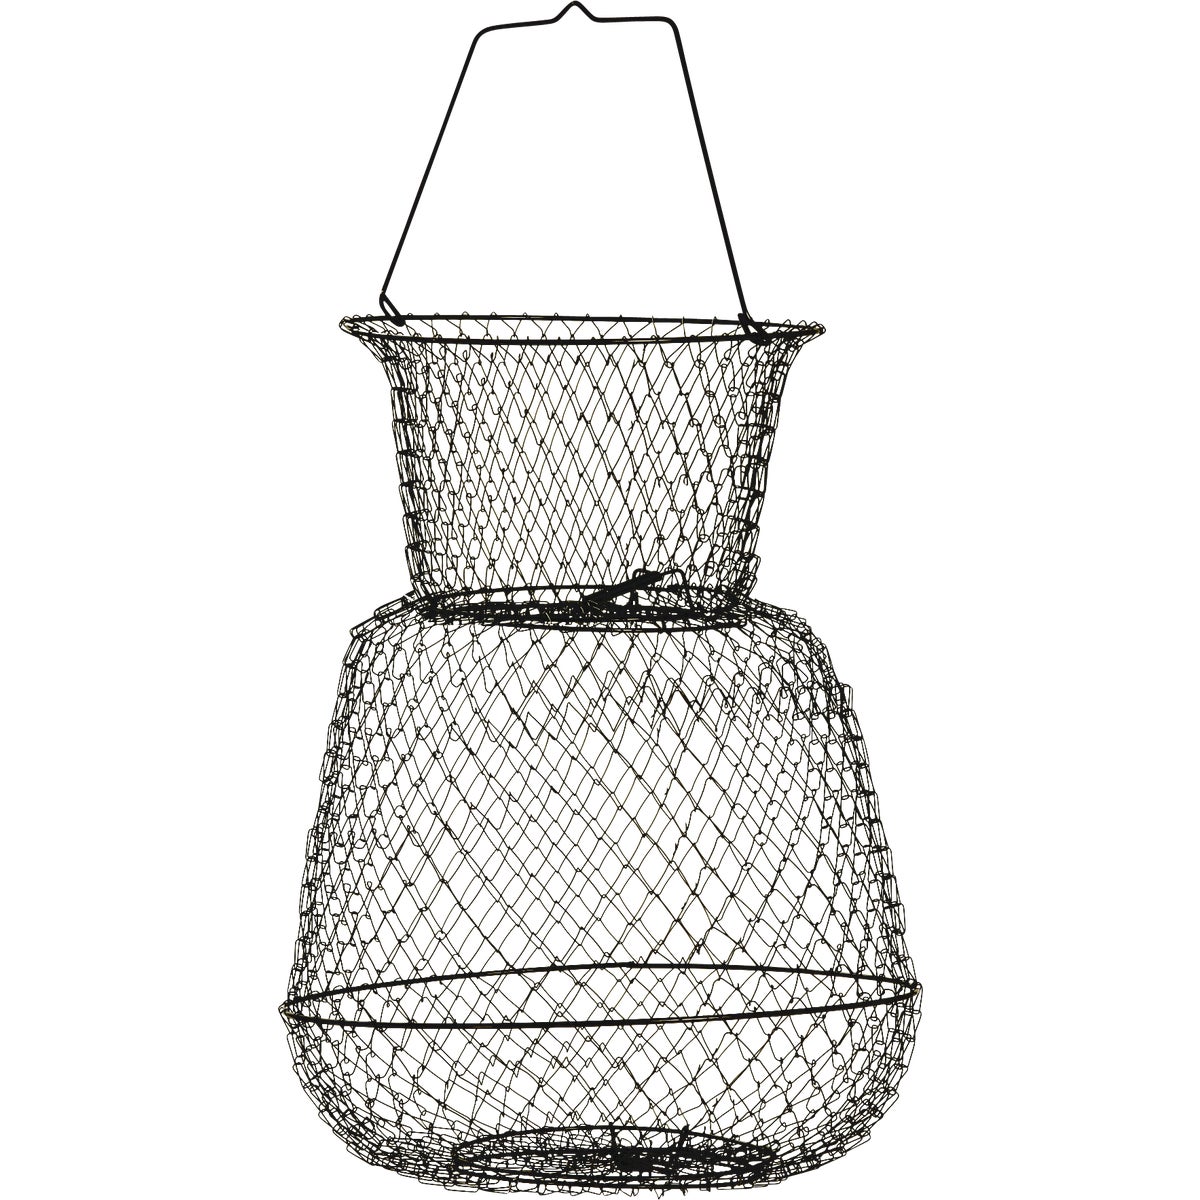 SouthBend 18 In. D. x 13 In. Dia. Wire Fish Basket